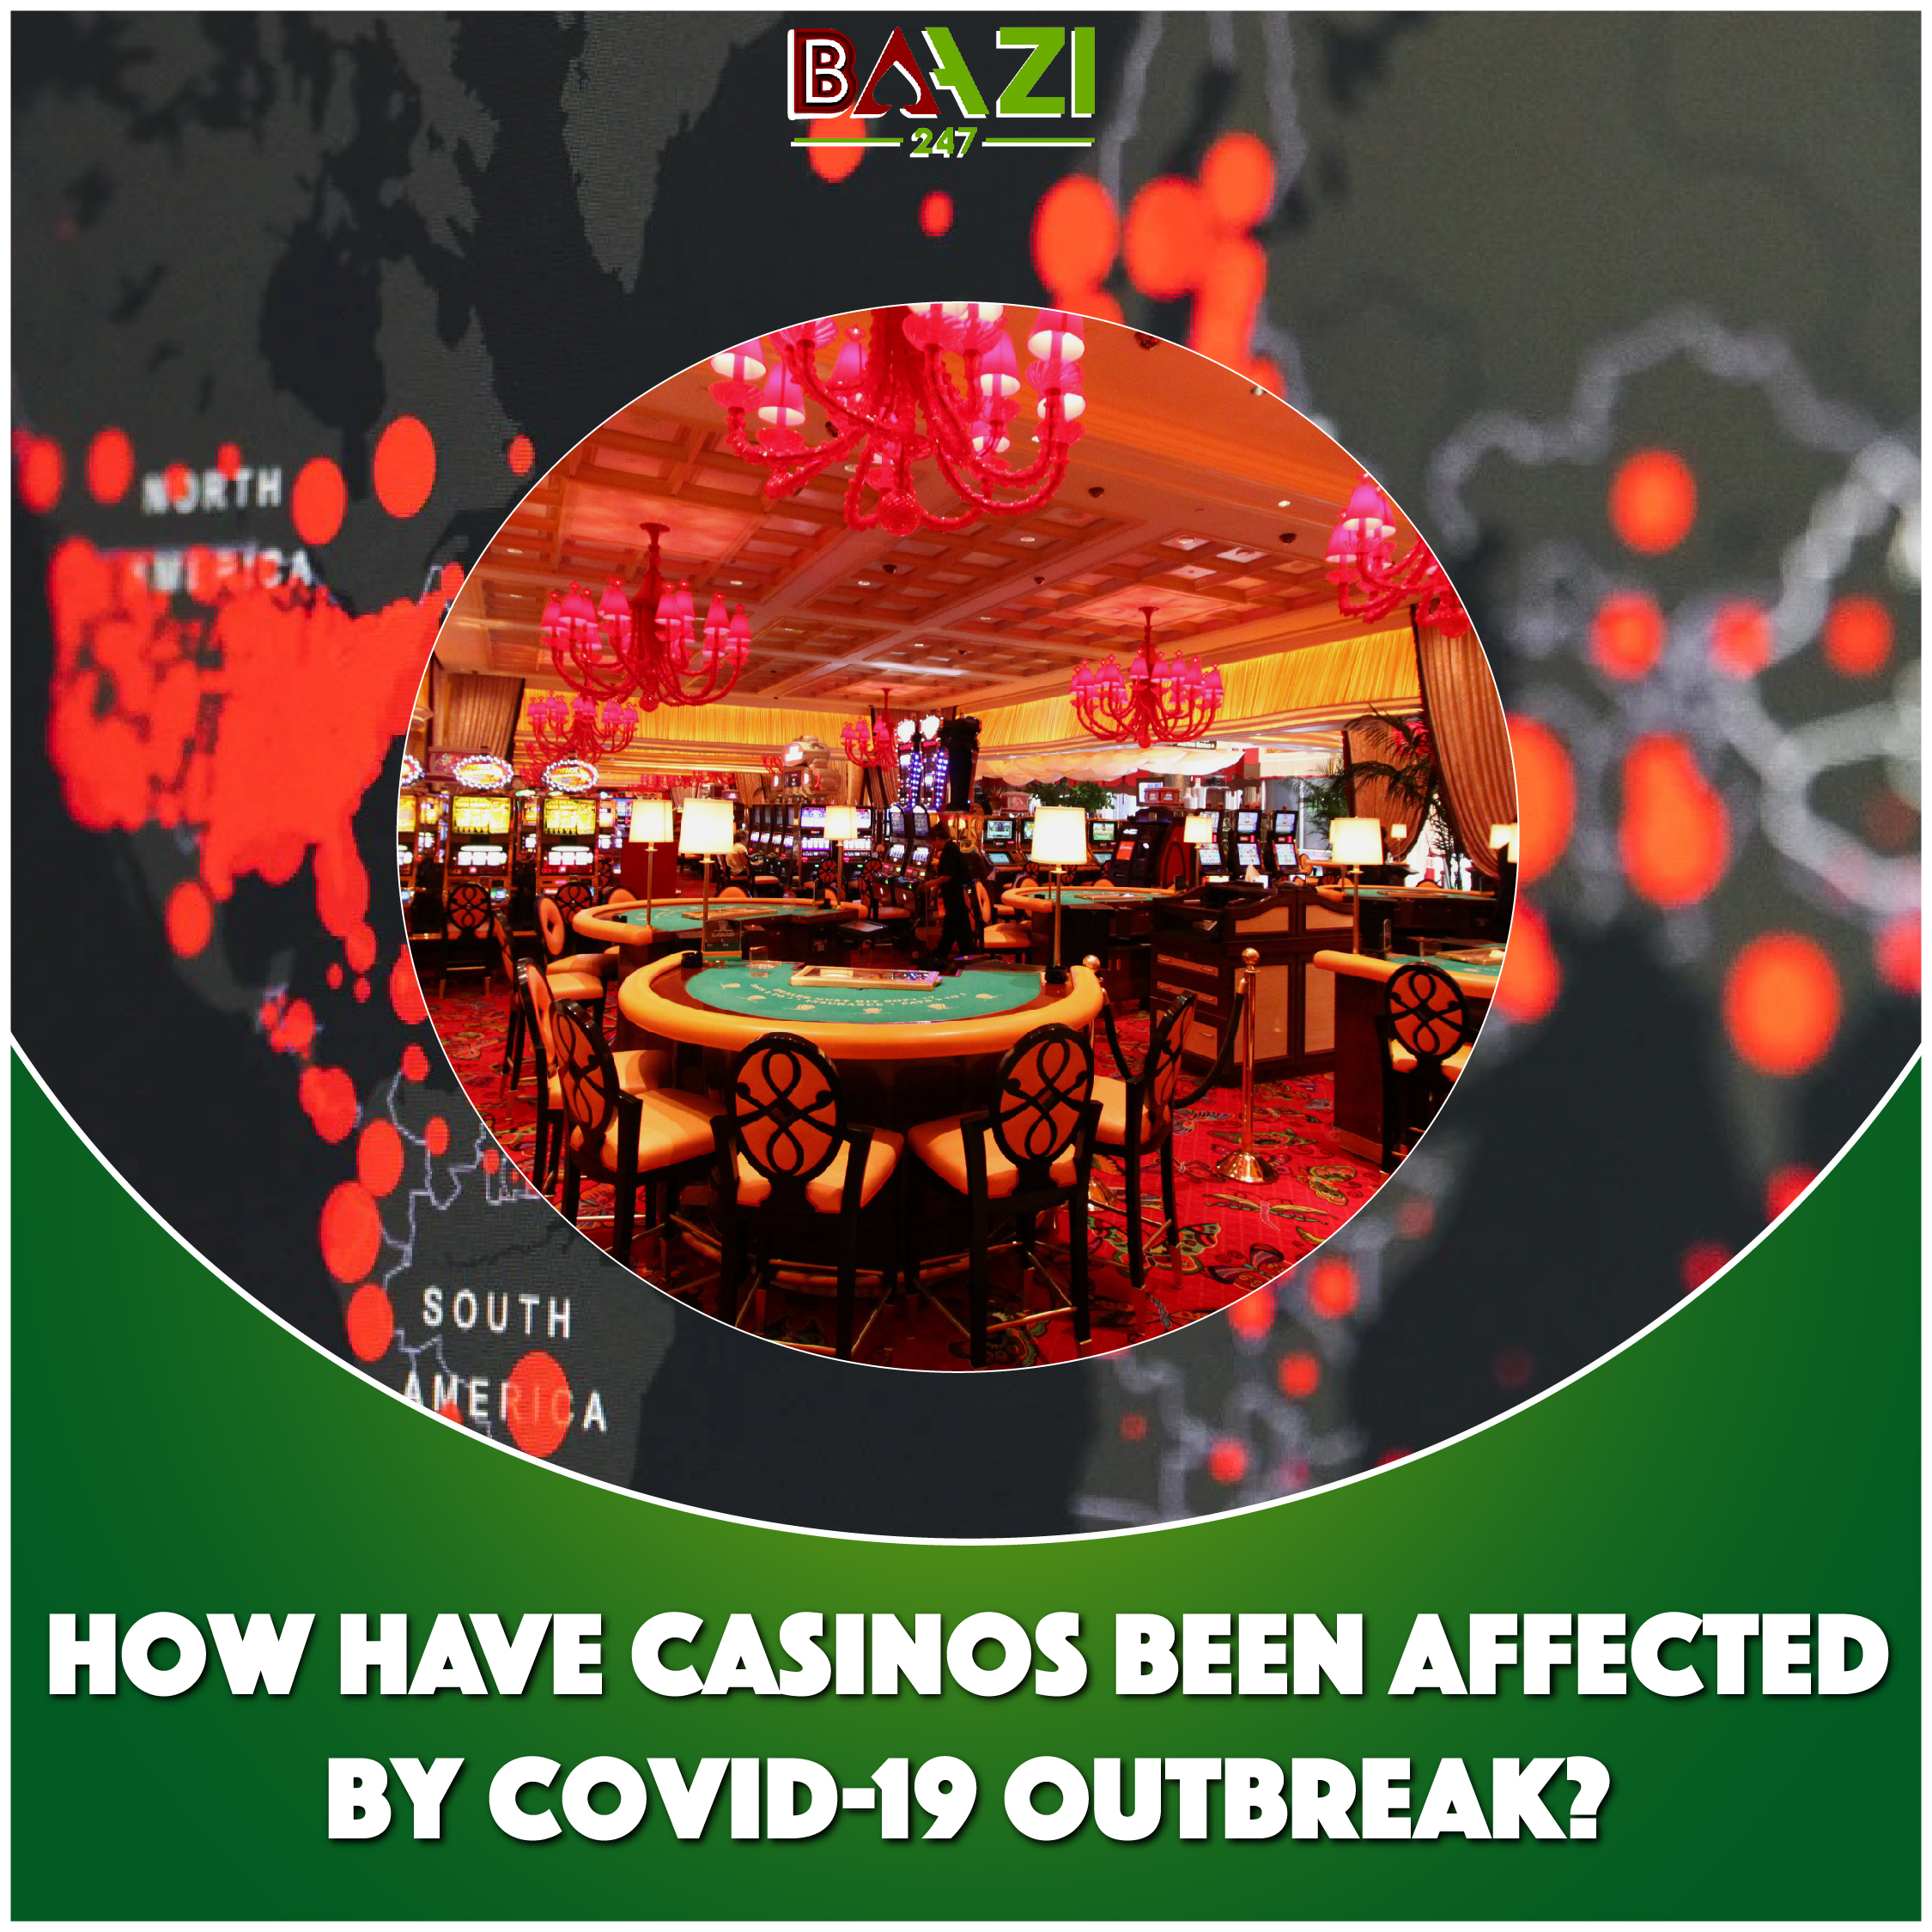 Casinos affected by Covid